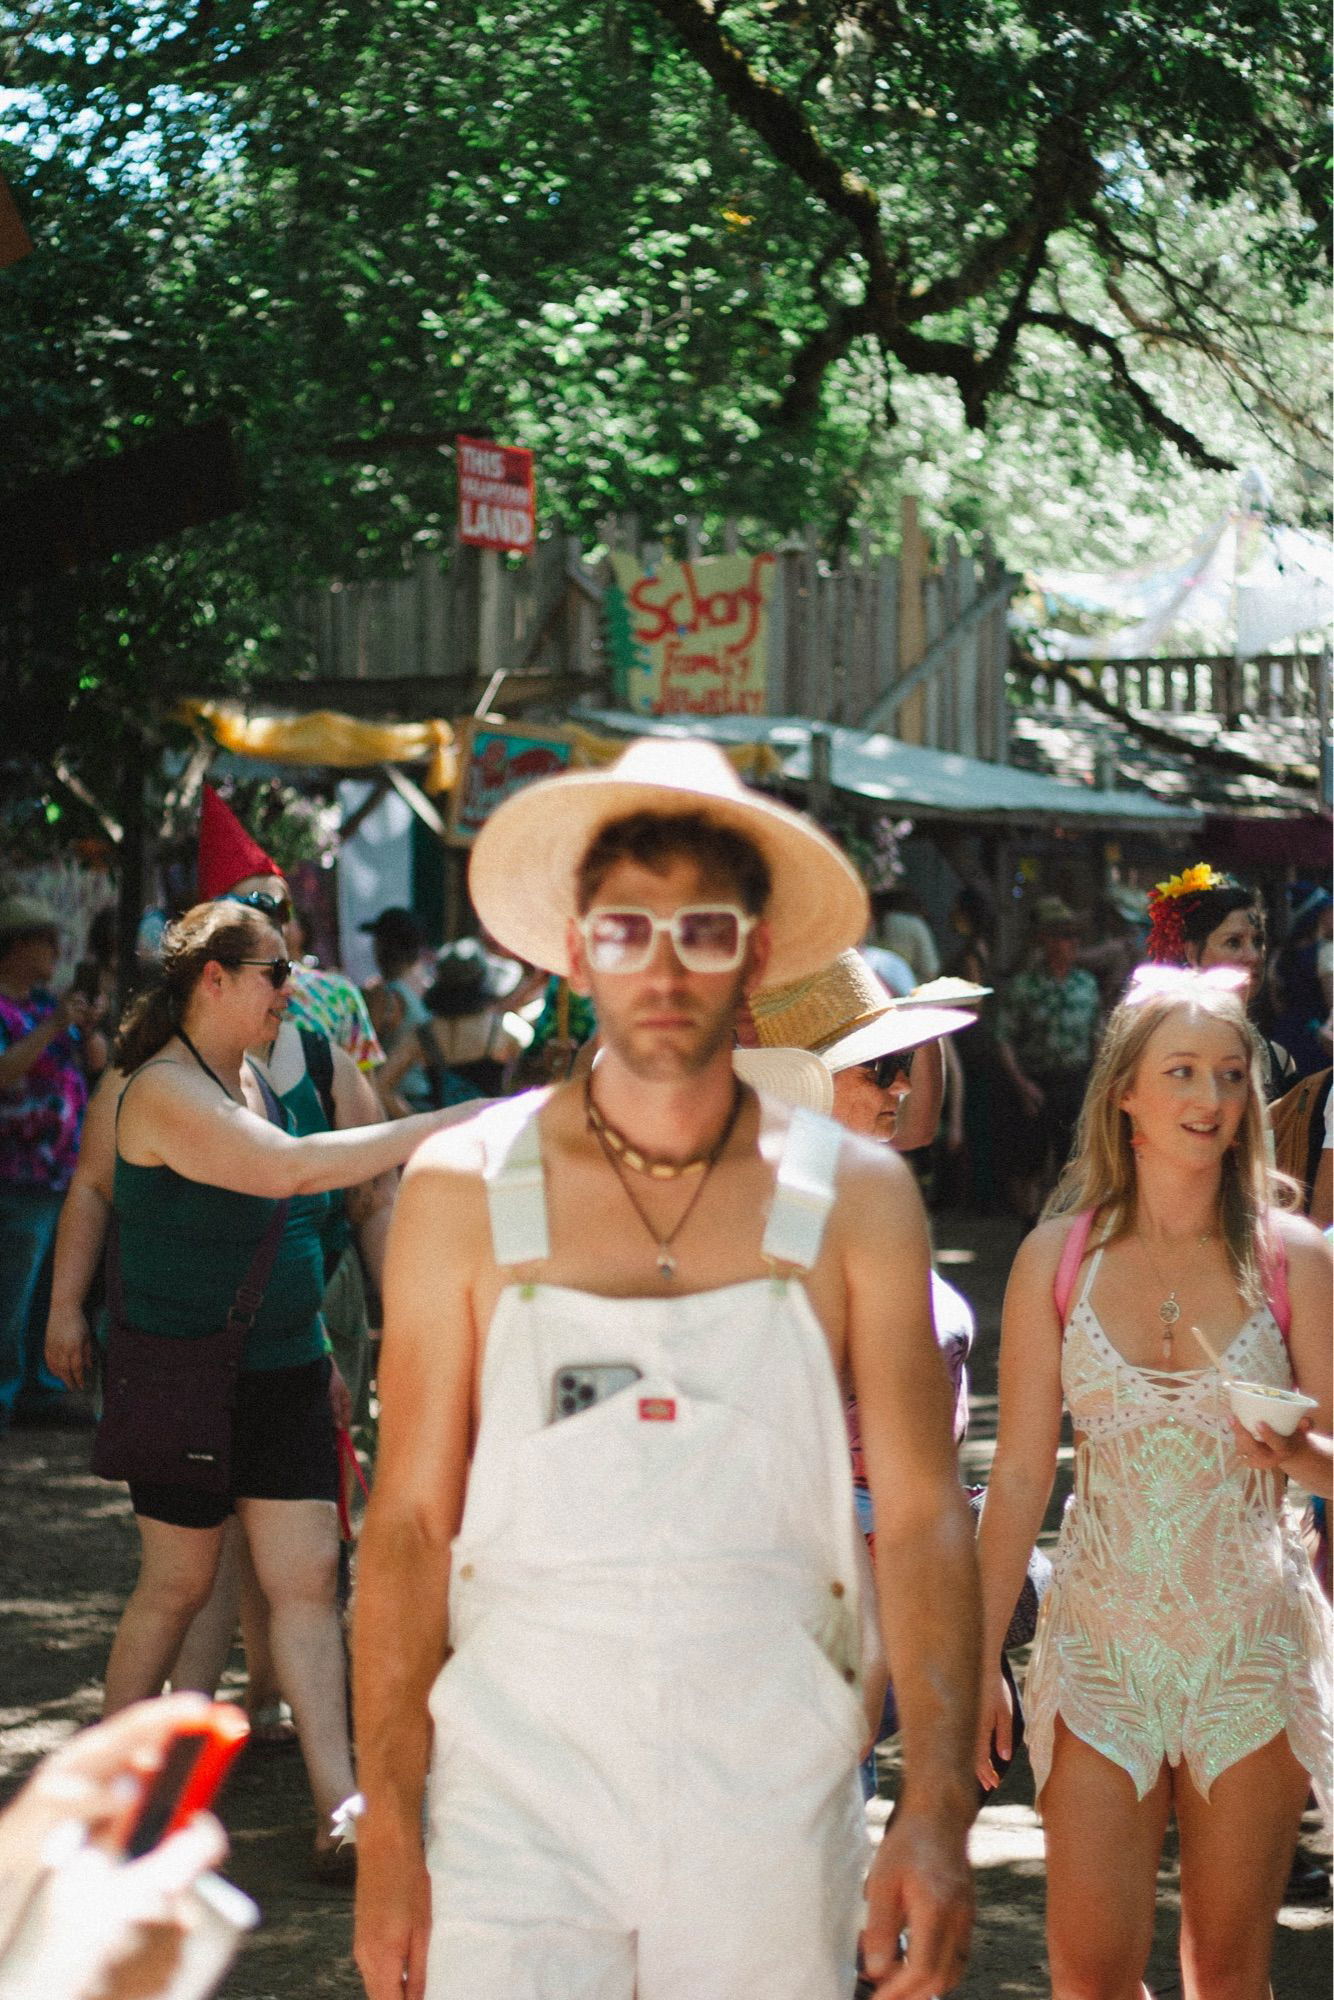 A person at a festival wearing white overalls, a wide-brimmed straw hat, and white sunglasses. They stand amidst a bustling crowd with colorful decorations and signs in the background, including one that reads “This Land” and another for a school family activity.